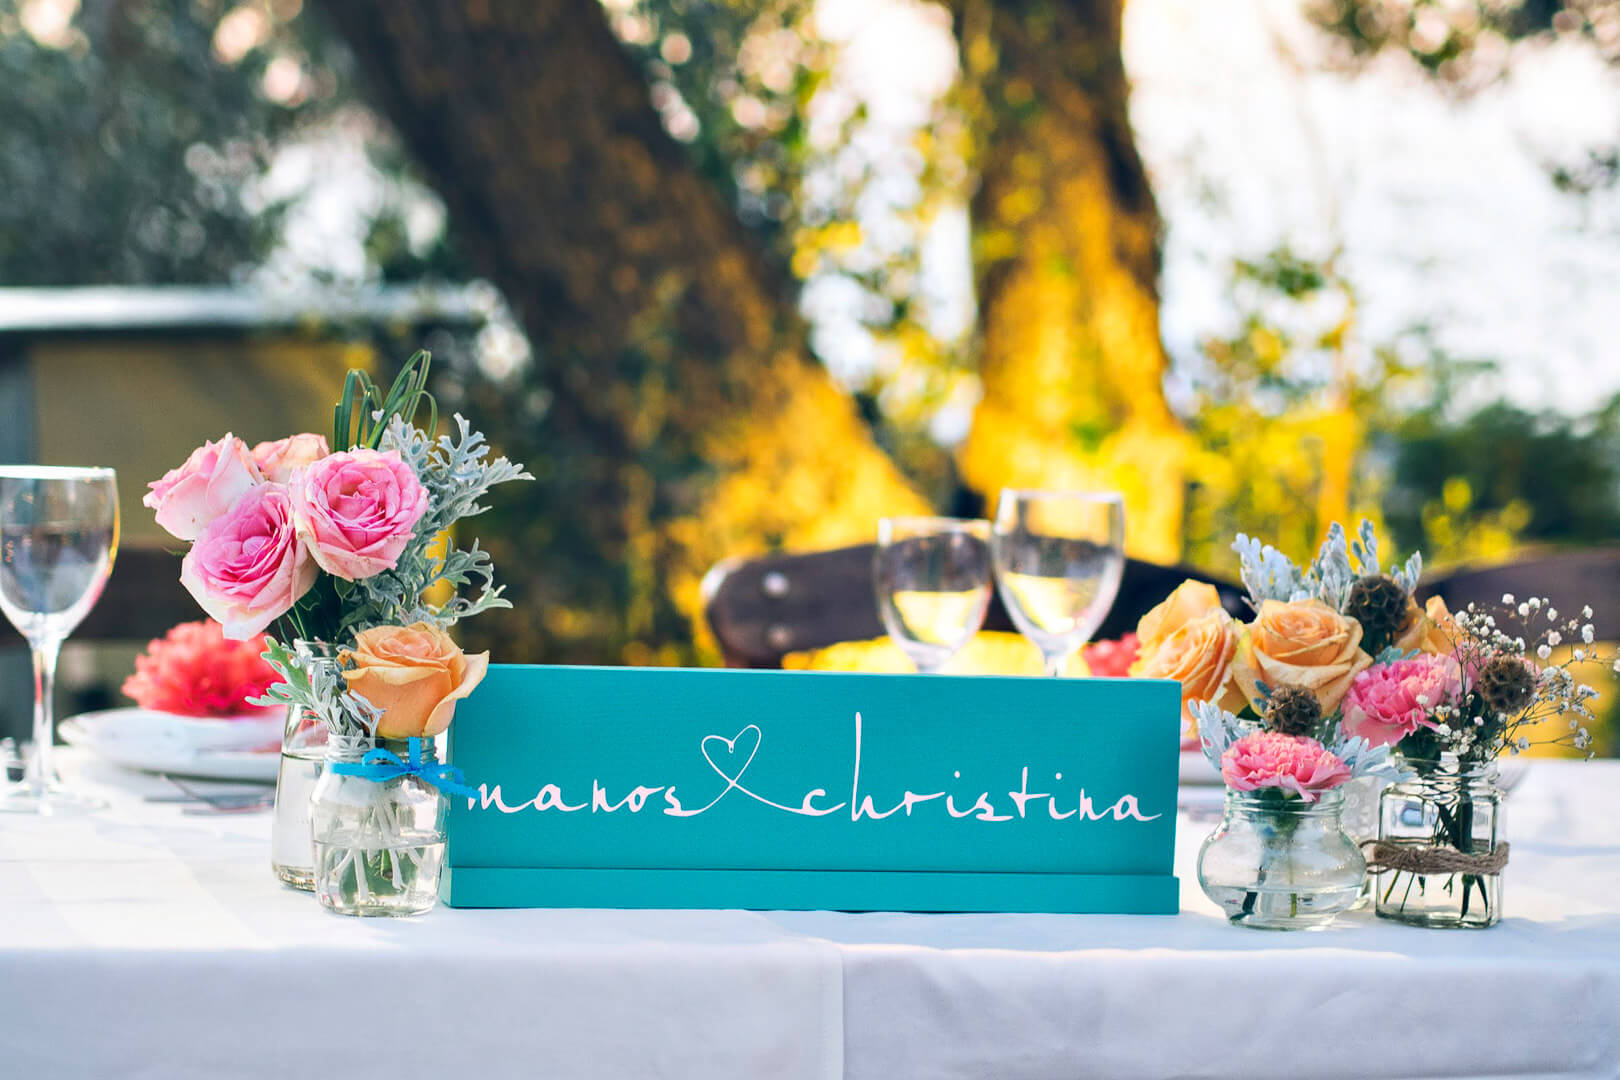 The happy couple's table, decorated with colourful fresh flowers.